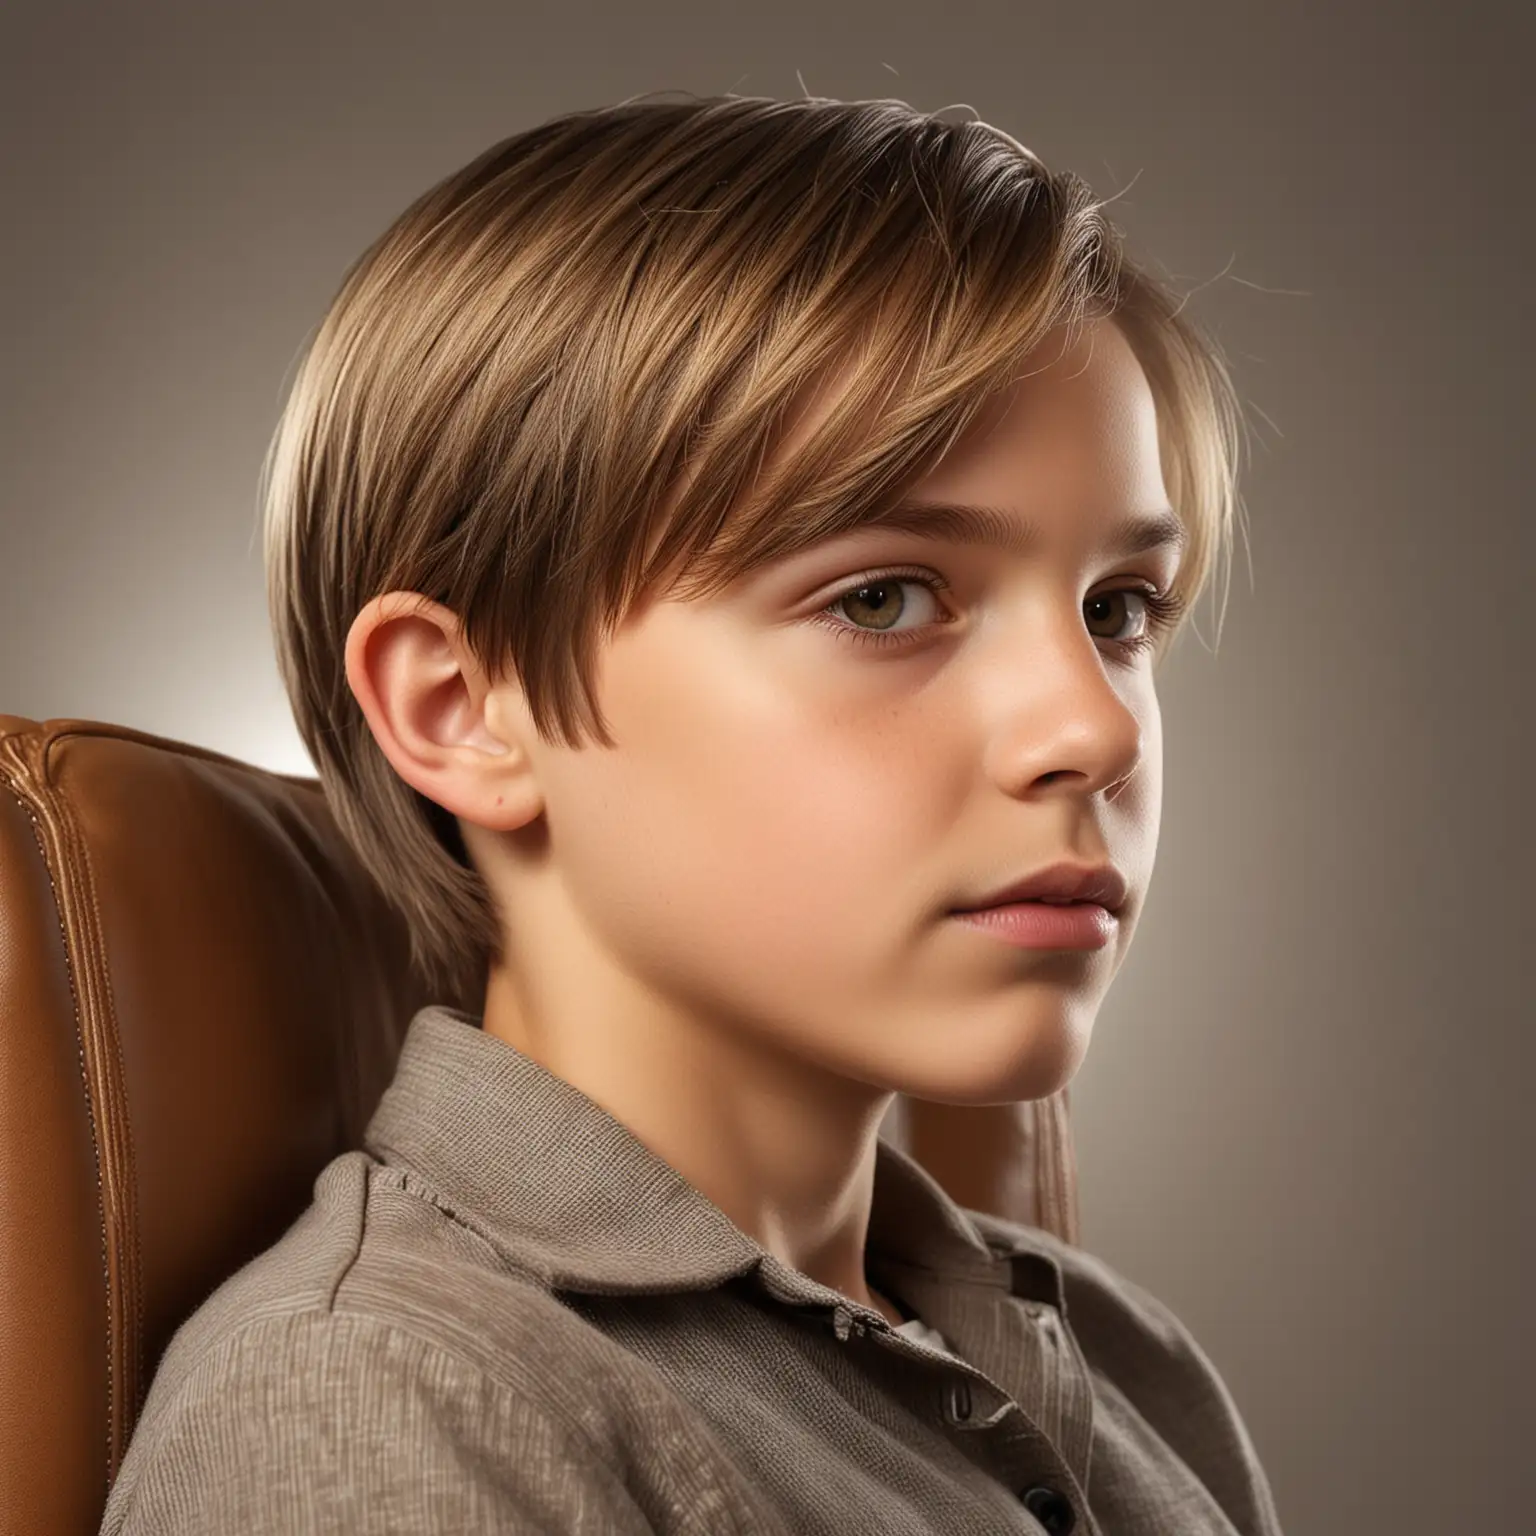 CloseUp Portrait of ElevenYearOld Boy with Smooth Light Brown Hair